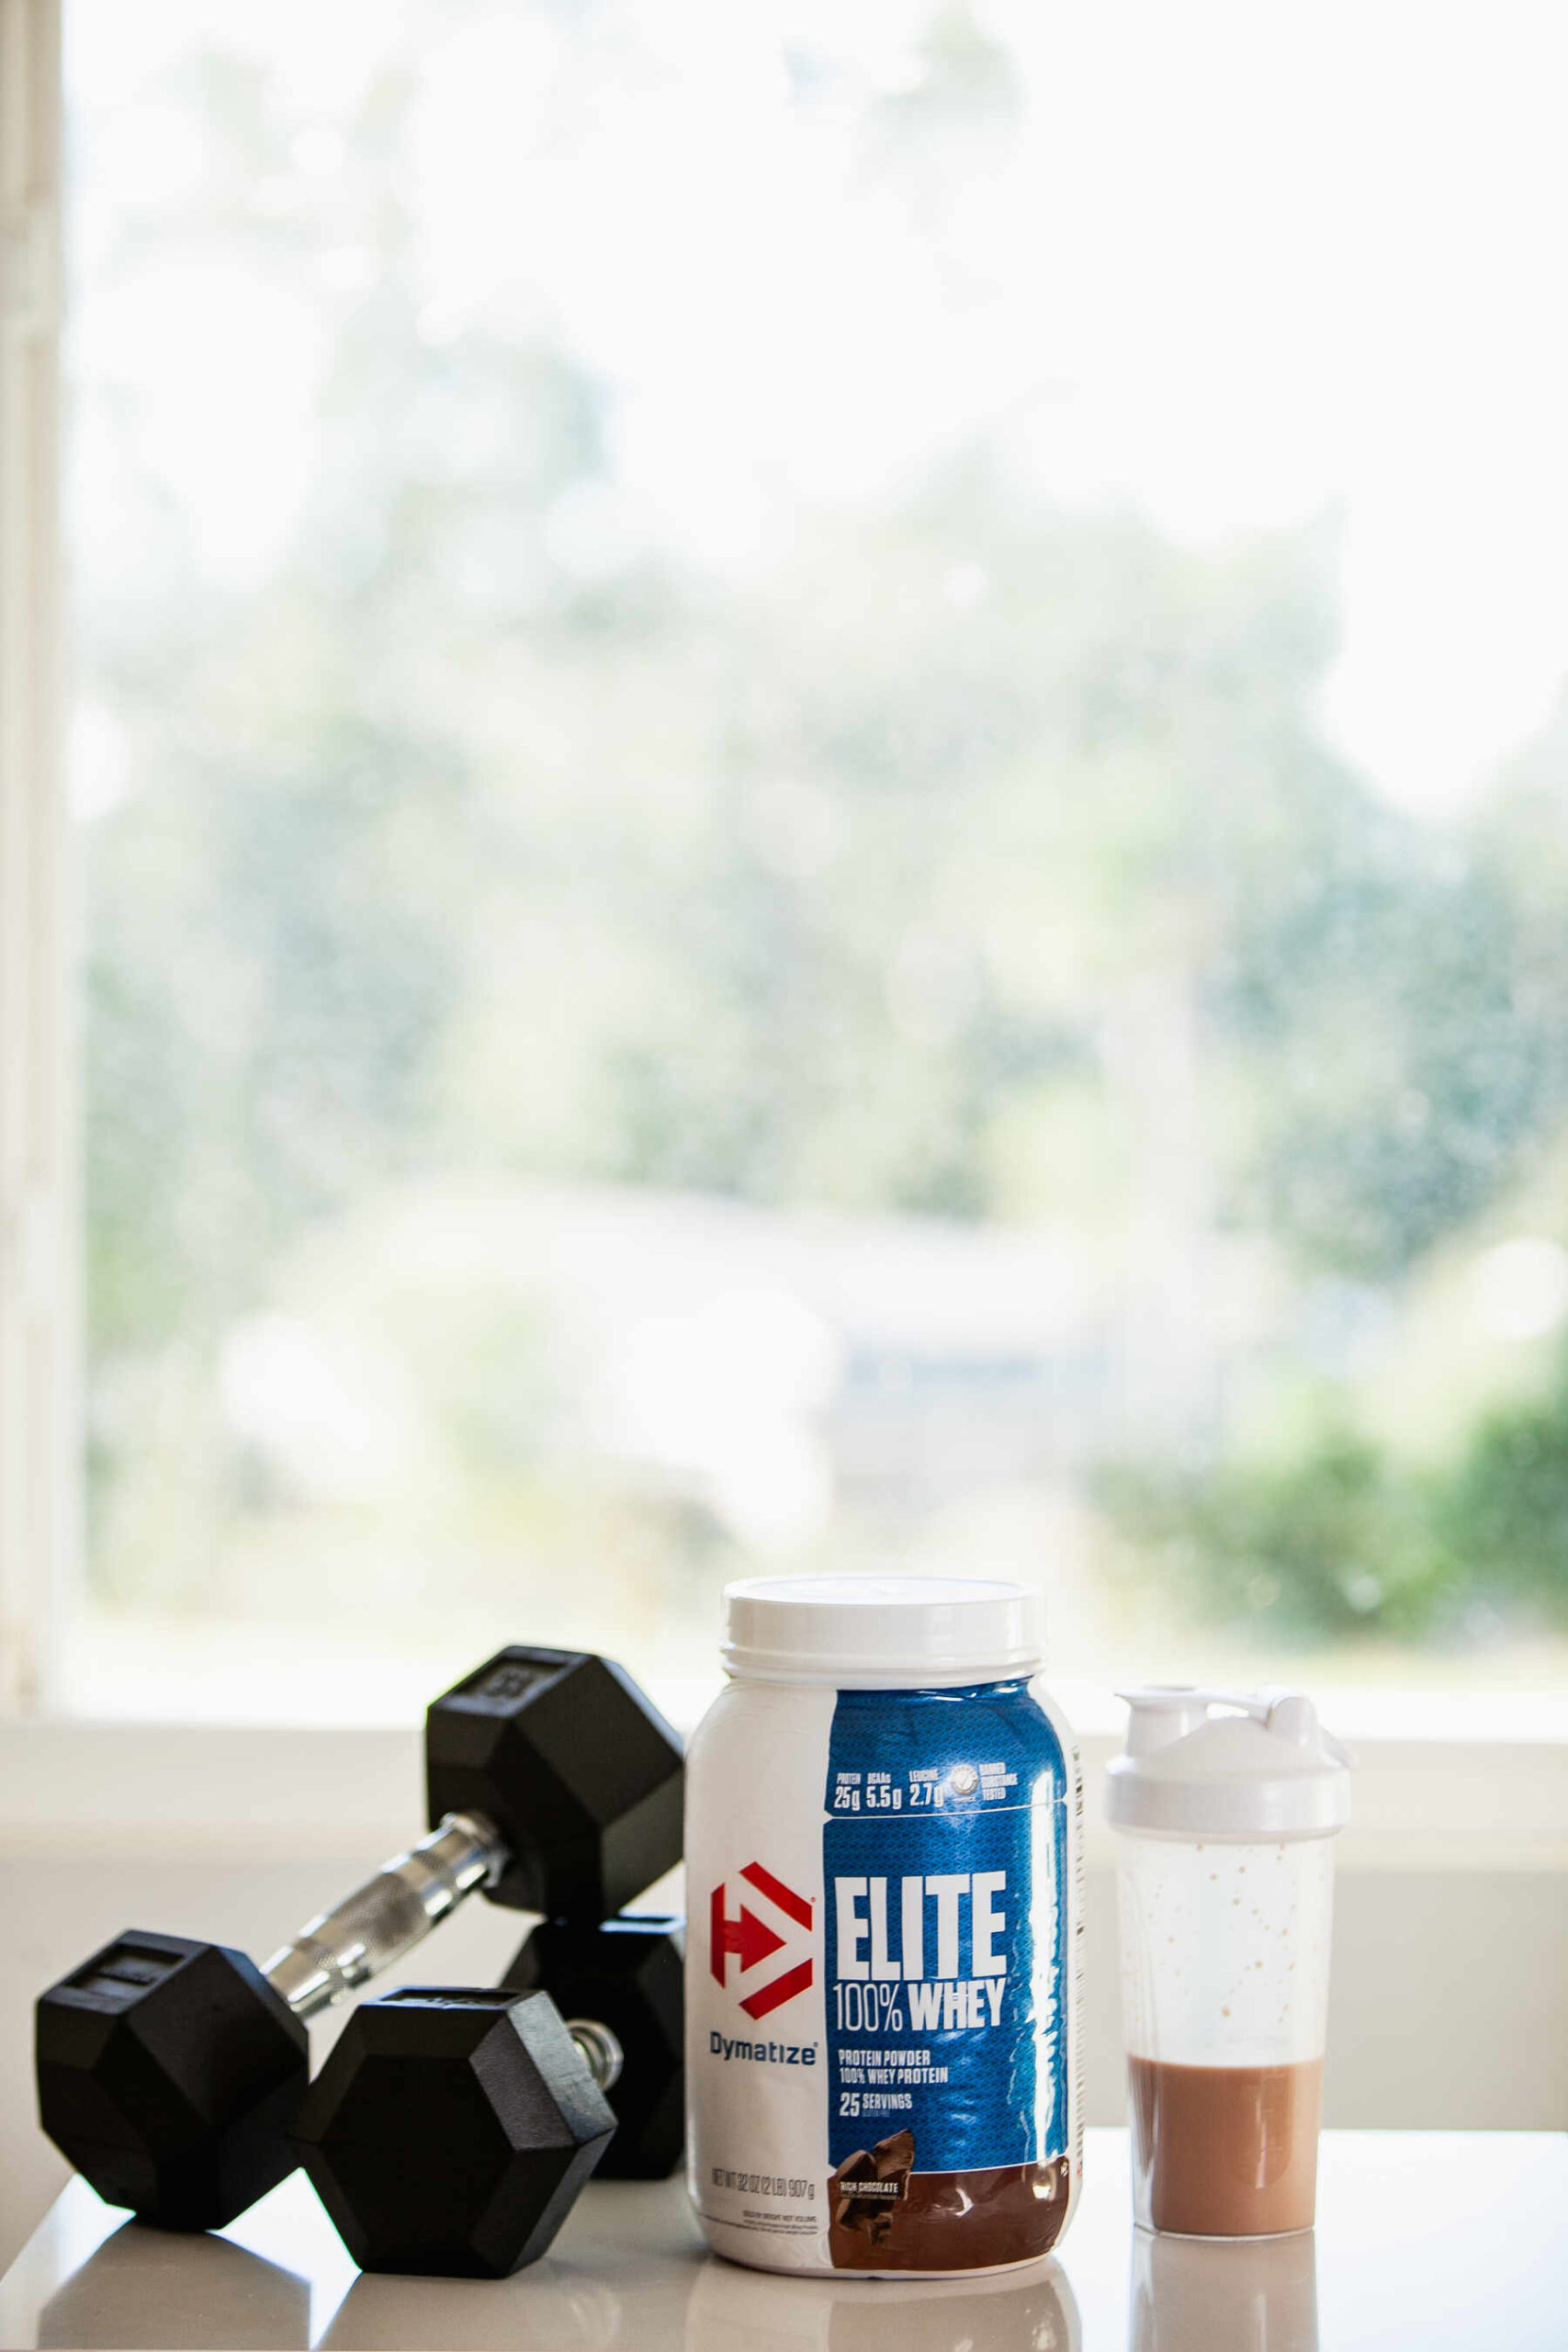 Elite 100% Whey protein powder beside a pair of dumbbells and a water bottle filled with protein shake